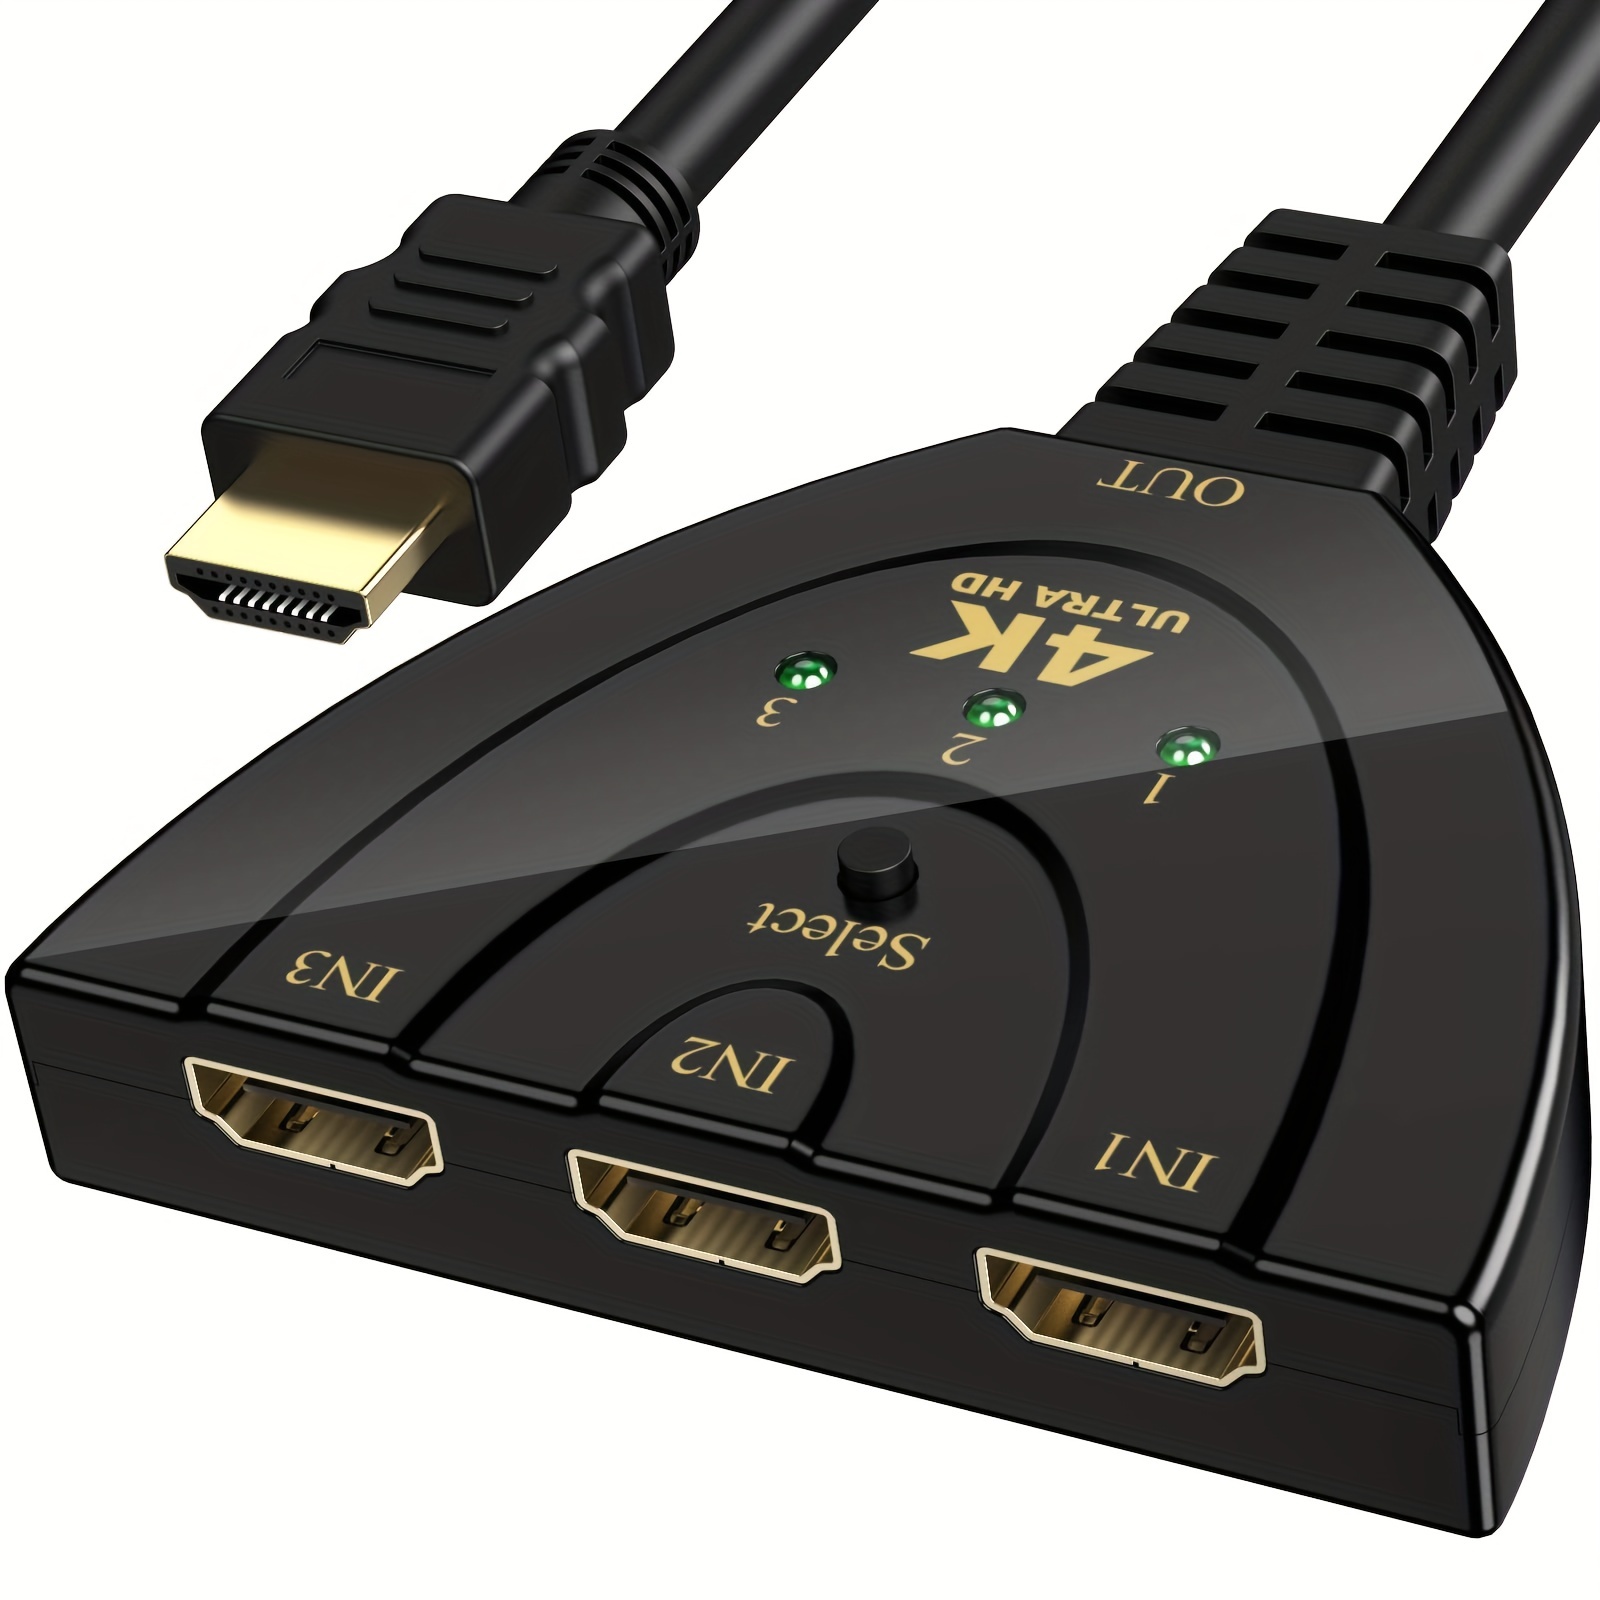 2 Input 1 Output HDMI 2-in 1-out HDMI 1.4 Auto Switcher Splitter Cable